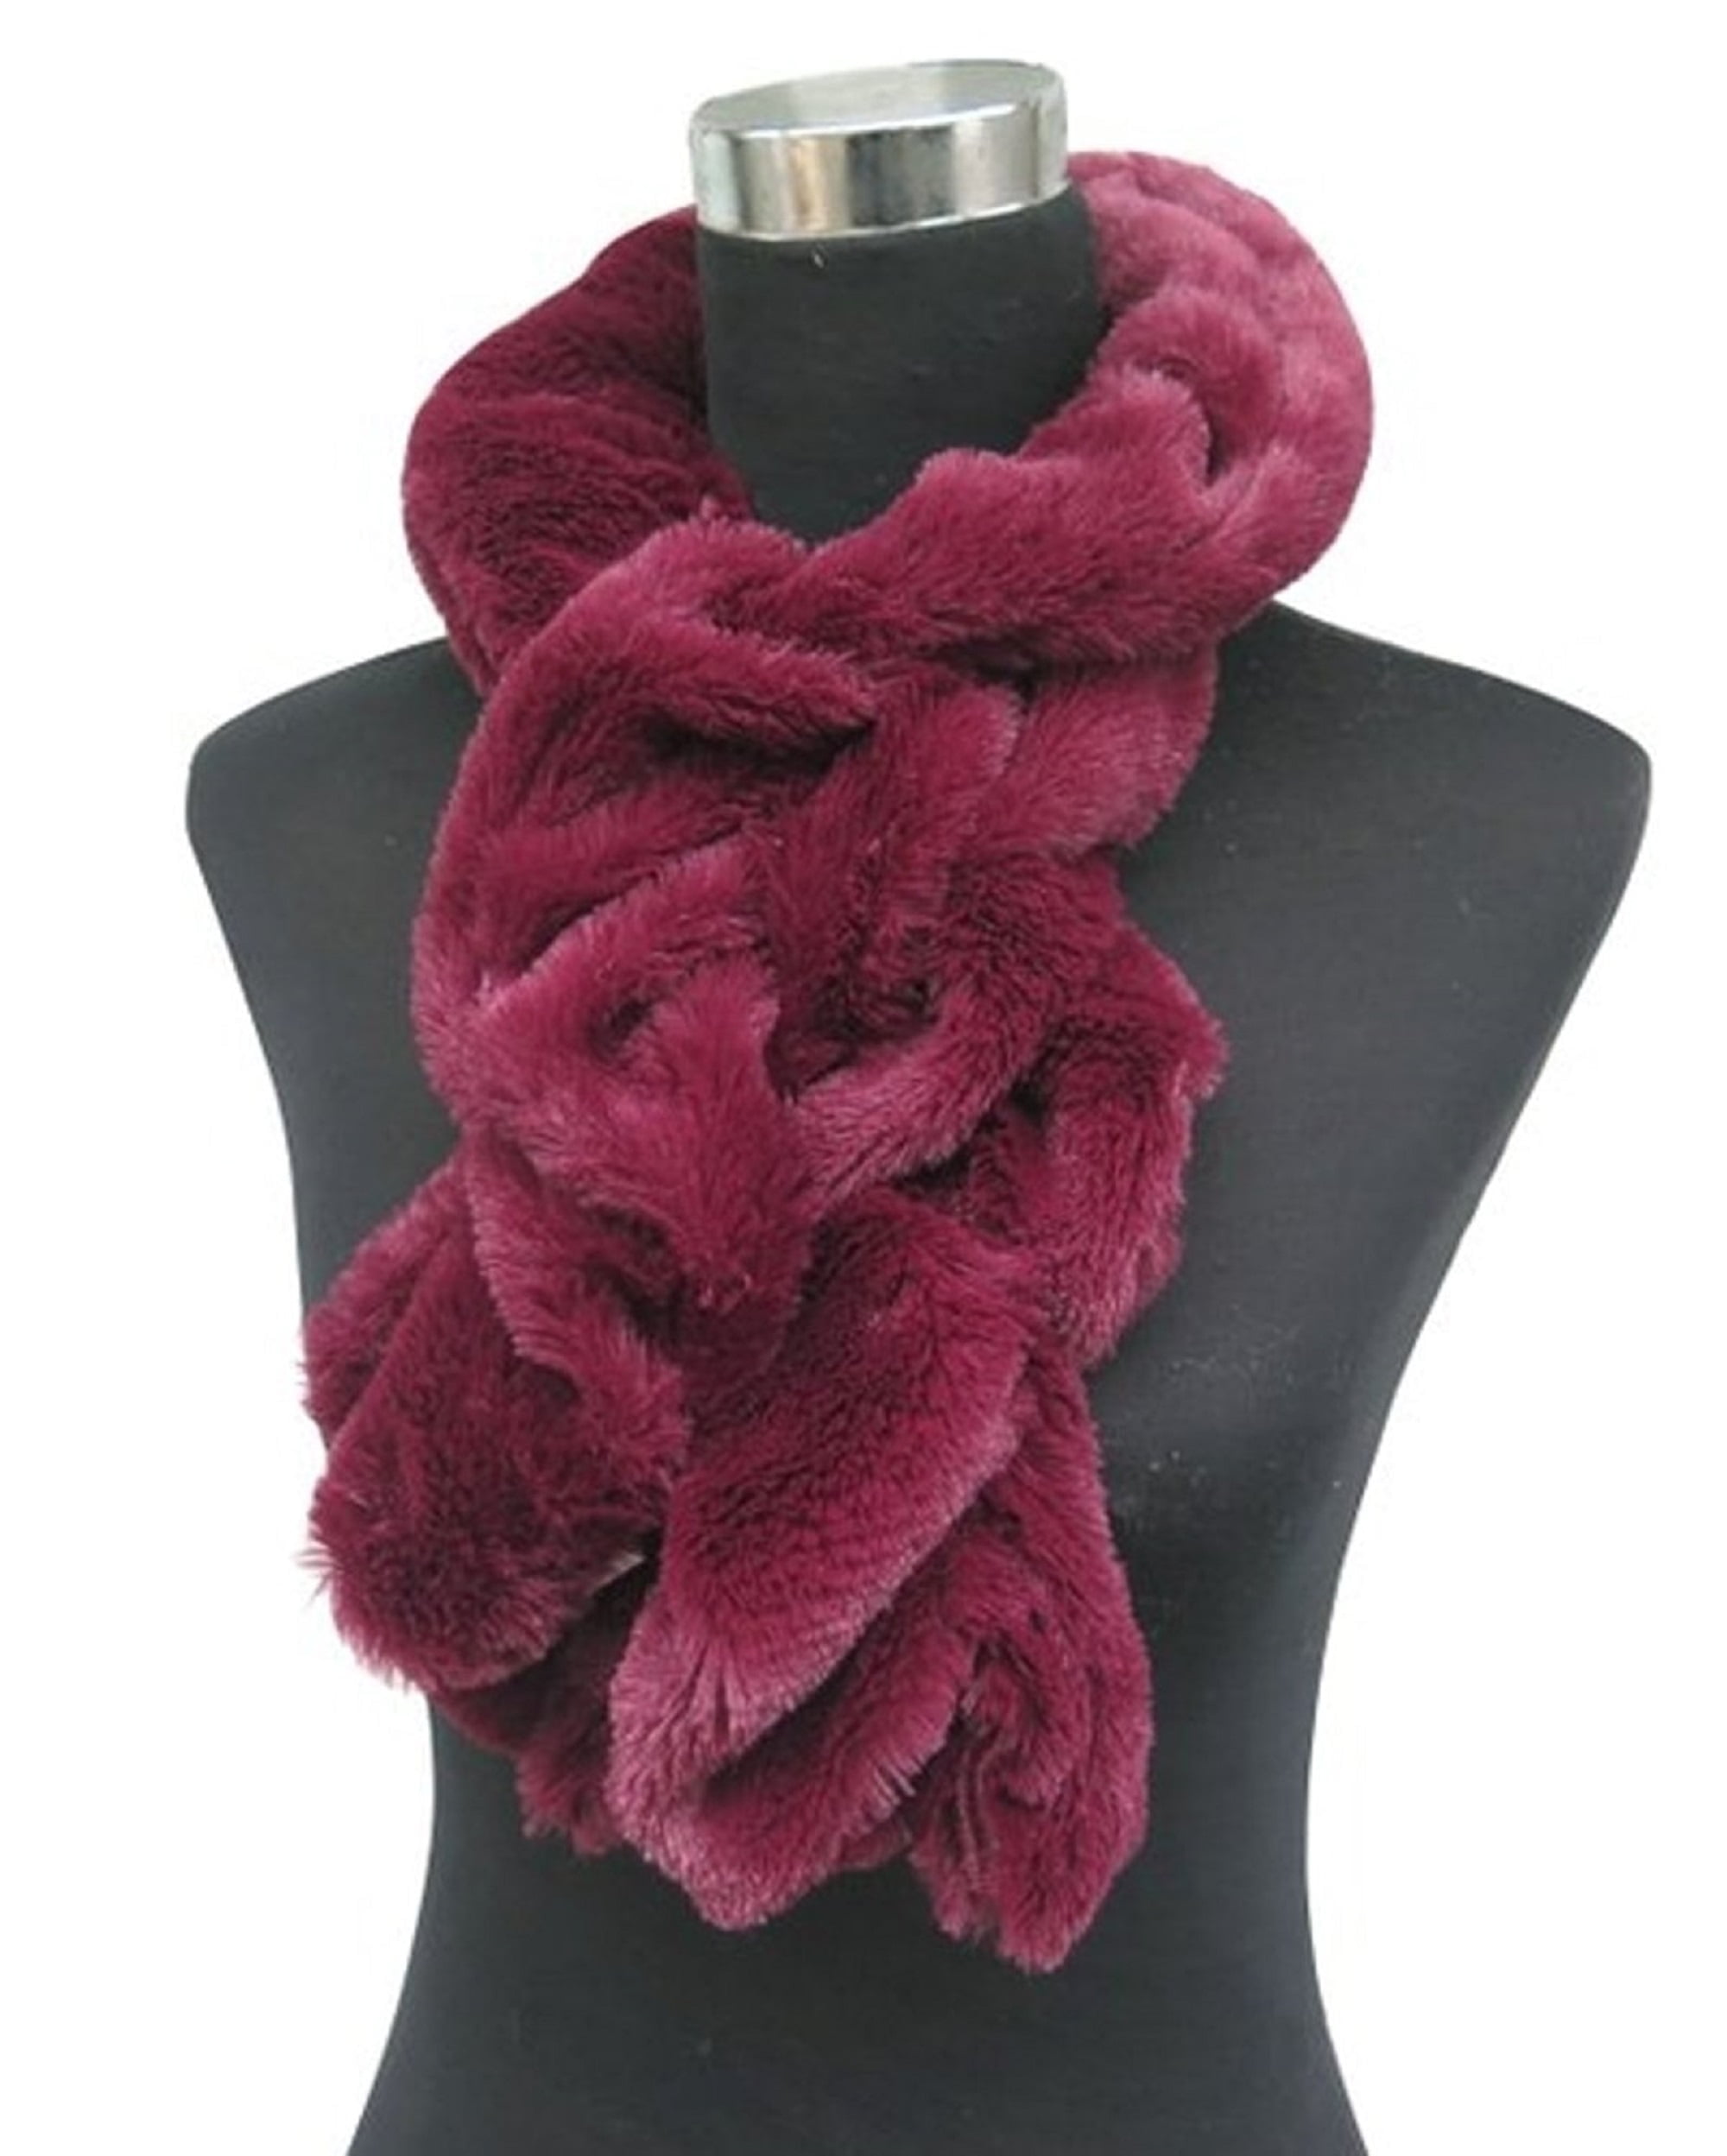 KM CHOICE ONE Scarf: Infinity Scarf, Faux Fur Shawl, Giving Shawl, Scarfs  for Women Winter Warm, Shawl Wraps for Women, Gifts for Men, Christmas  Gift, Soft & Fluffy Scarf in Gift Box (